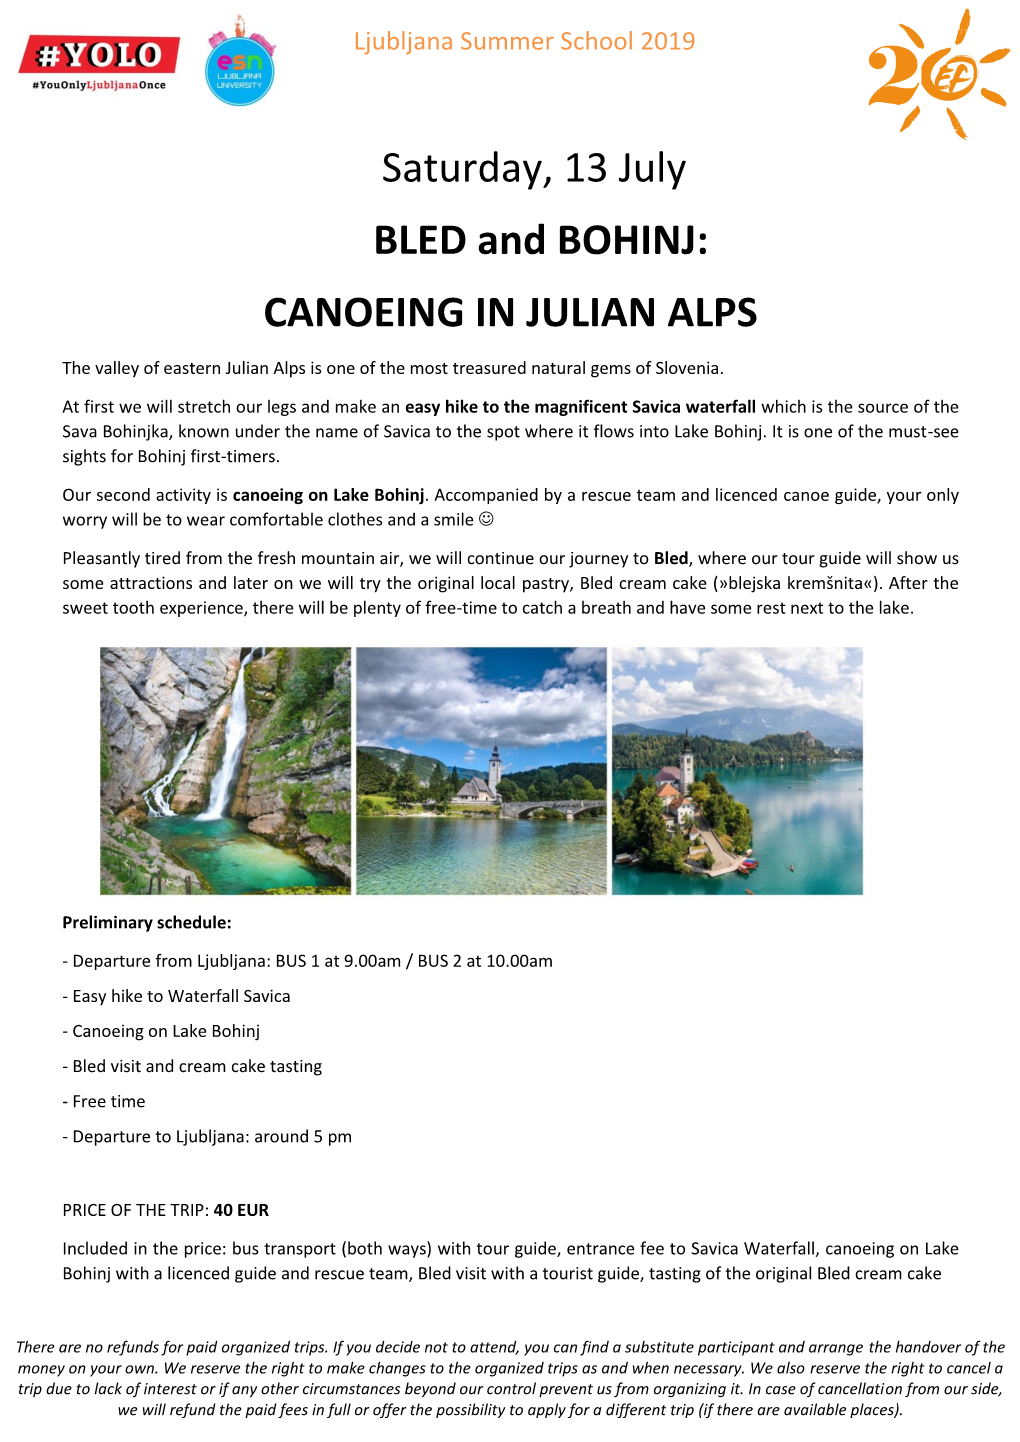 Saturday, 13 July BLED and BOHINJ: CANOEING in JULIAN ALPS